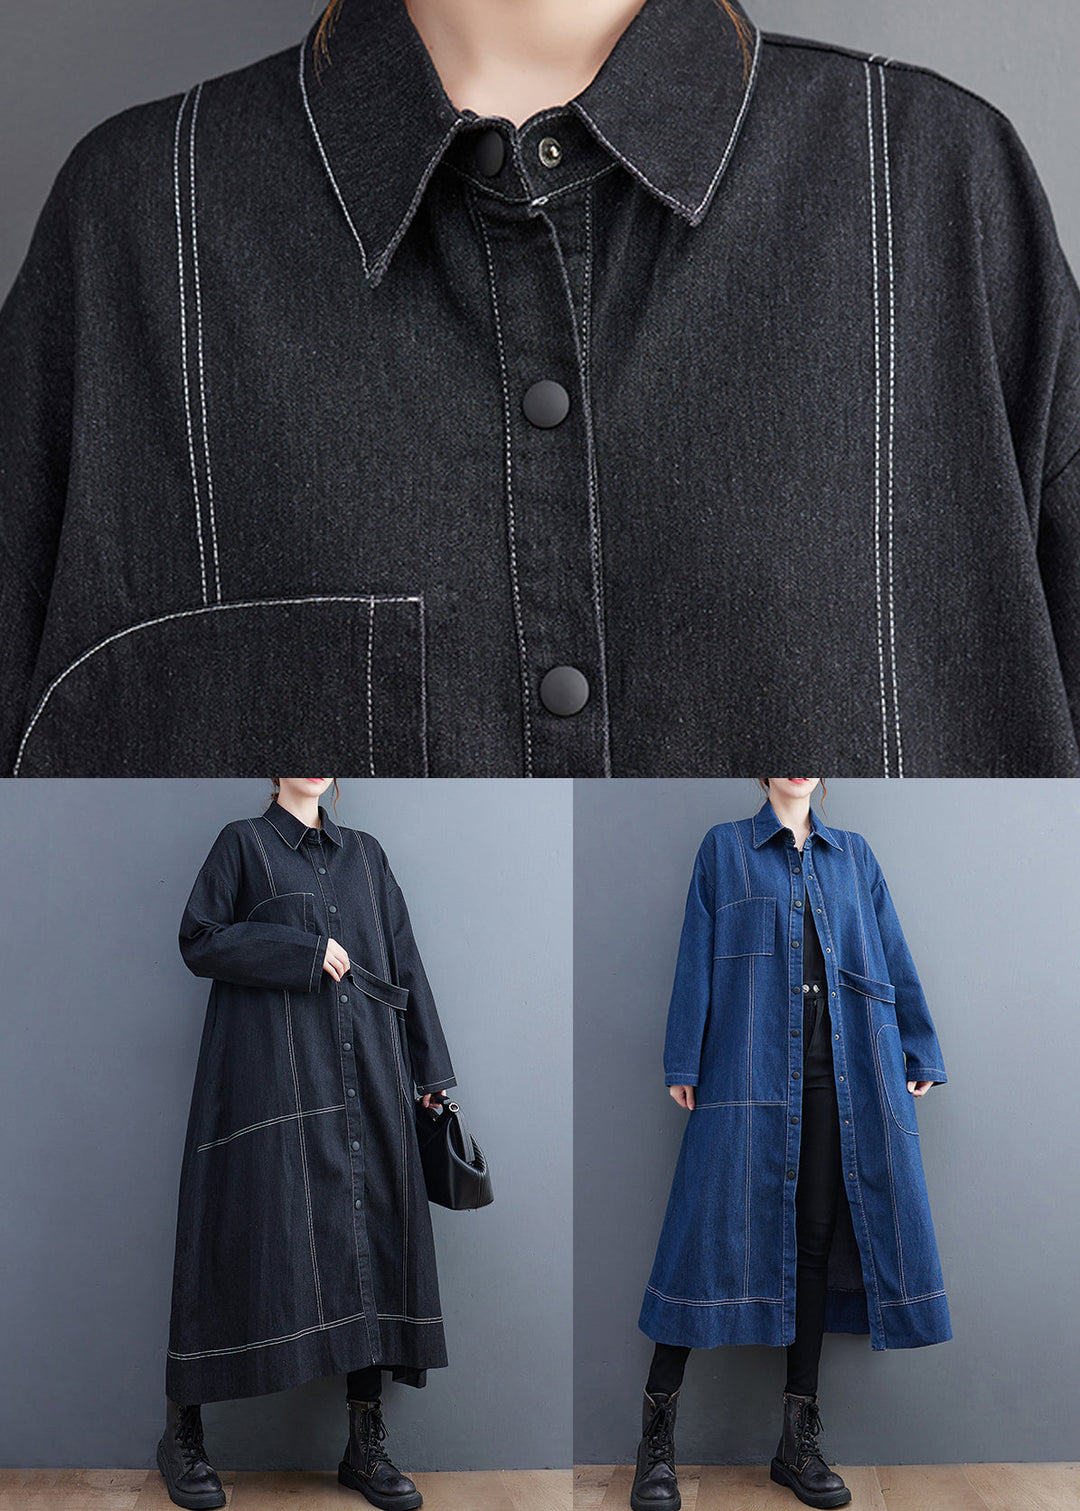 French Black Button Pockets Denim Long Trench Coat Fall